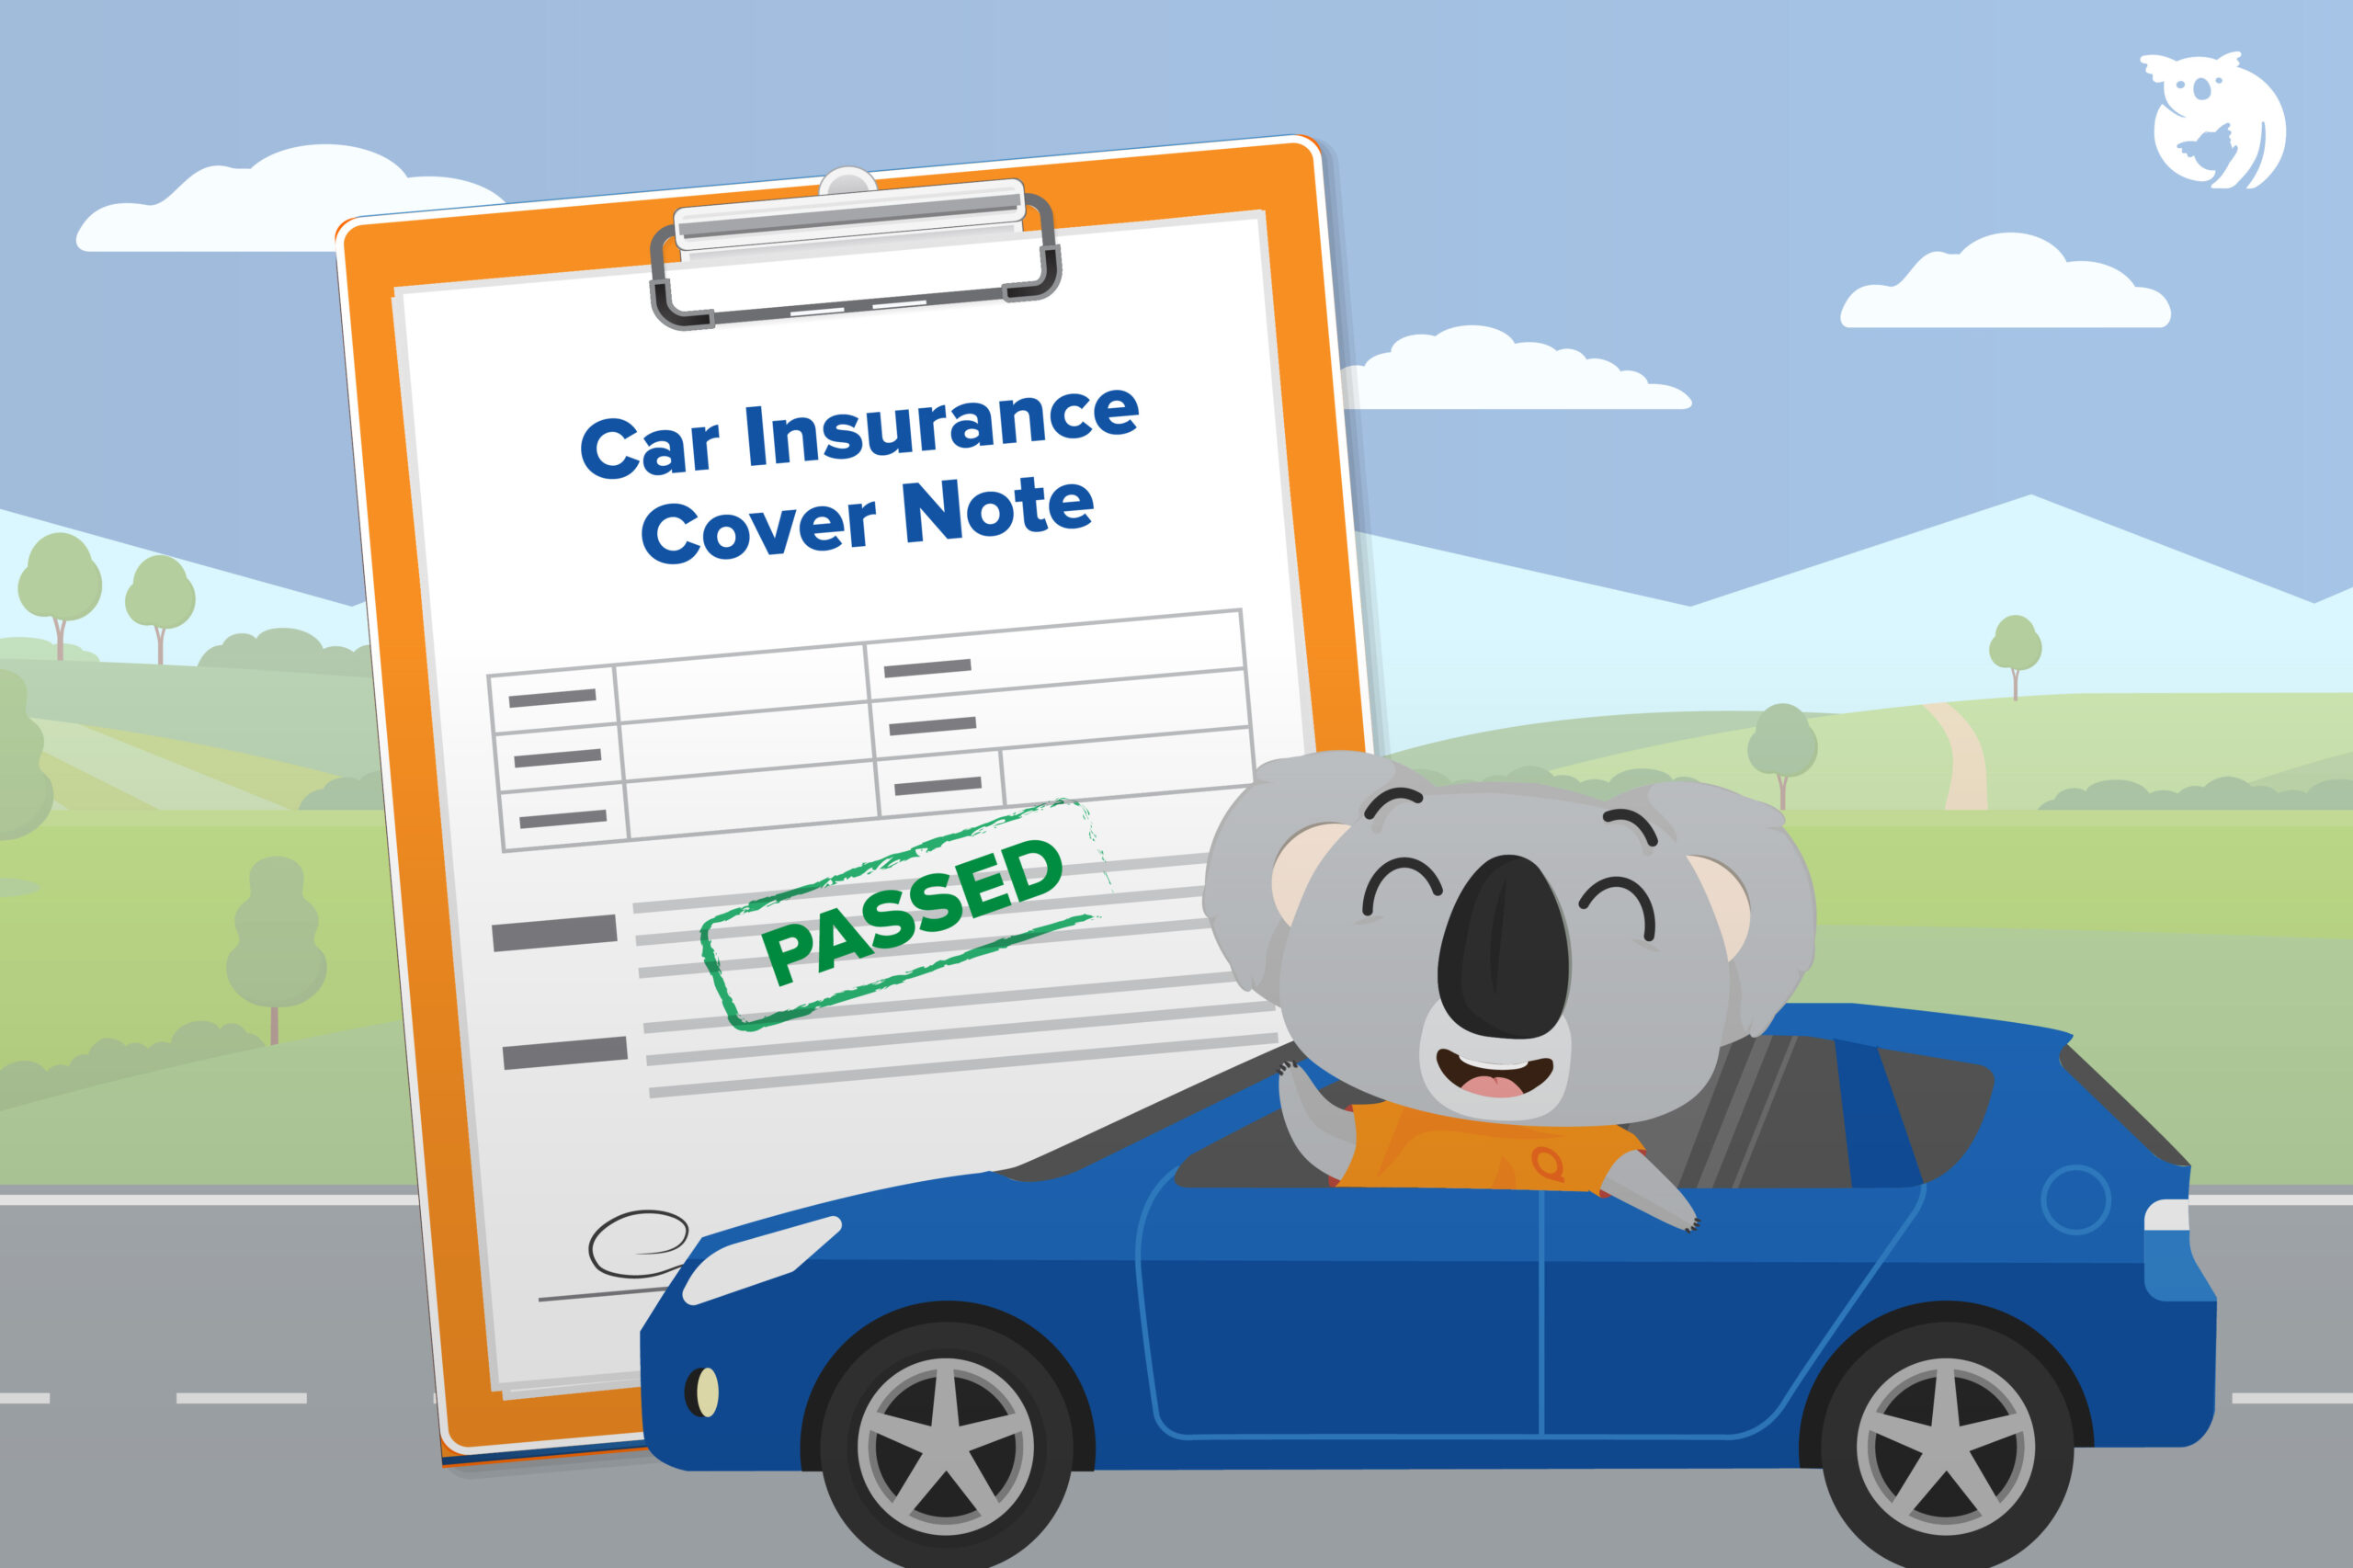 Car Insurance Cover Note Lost? Here Are 5 Ways to Retrieve It